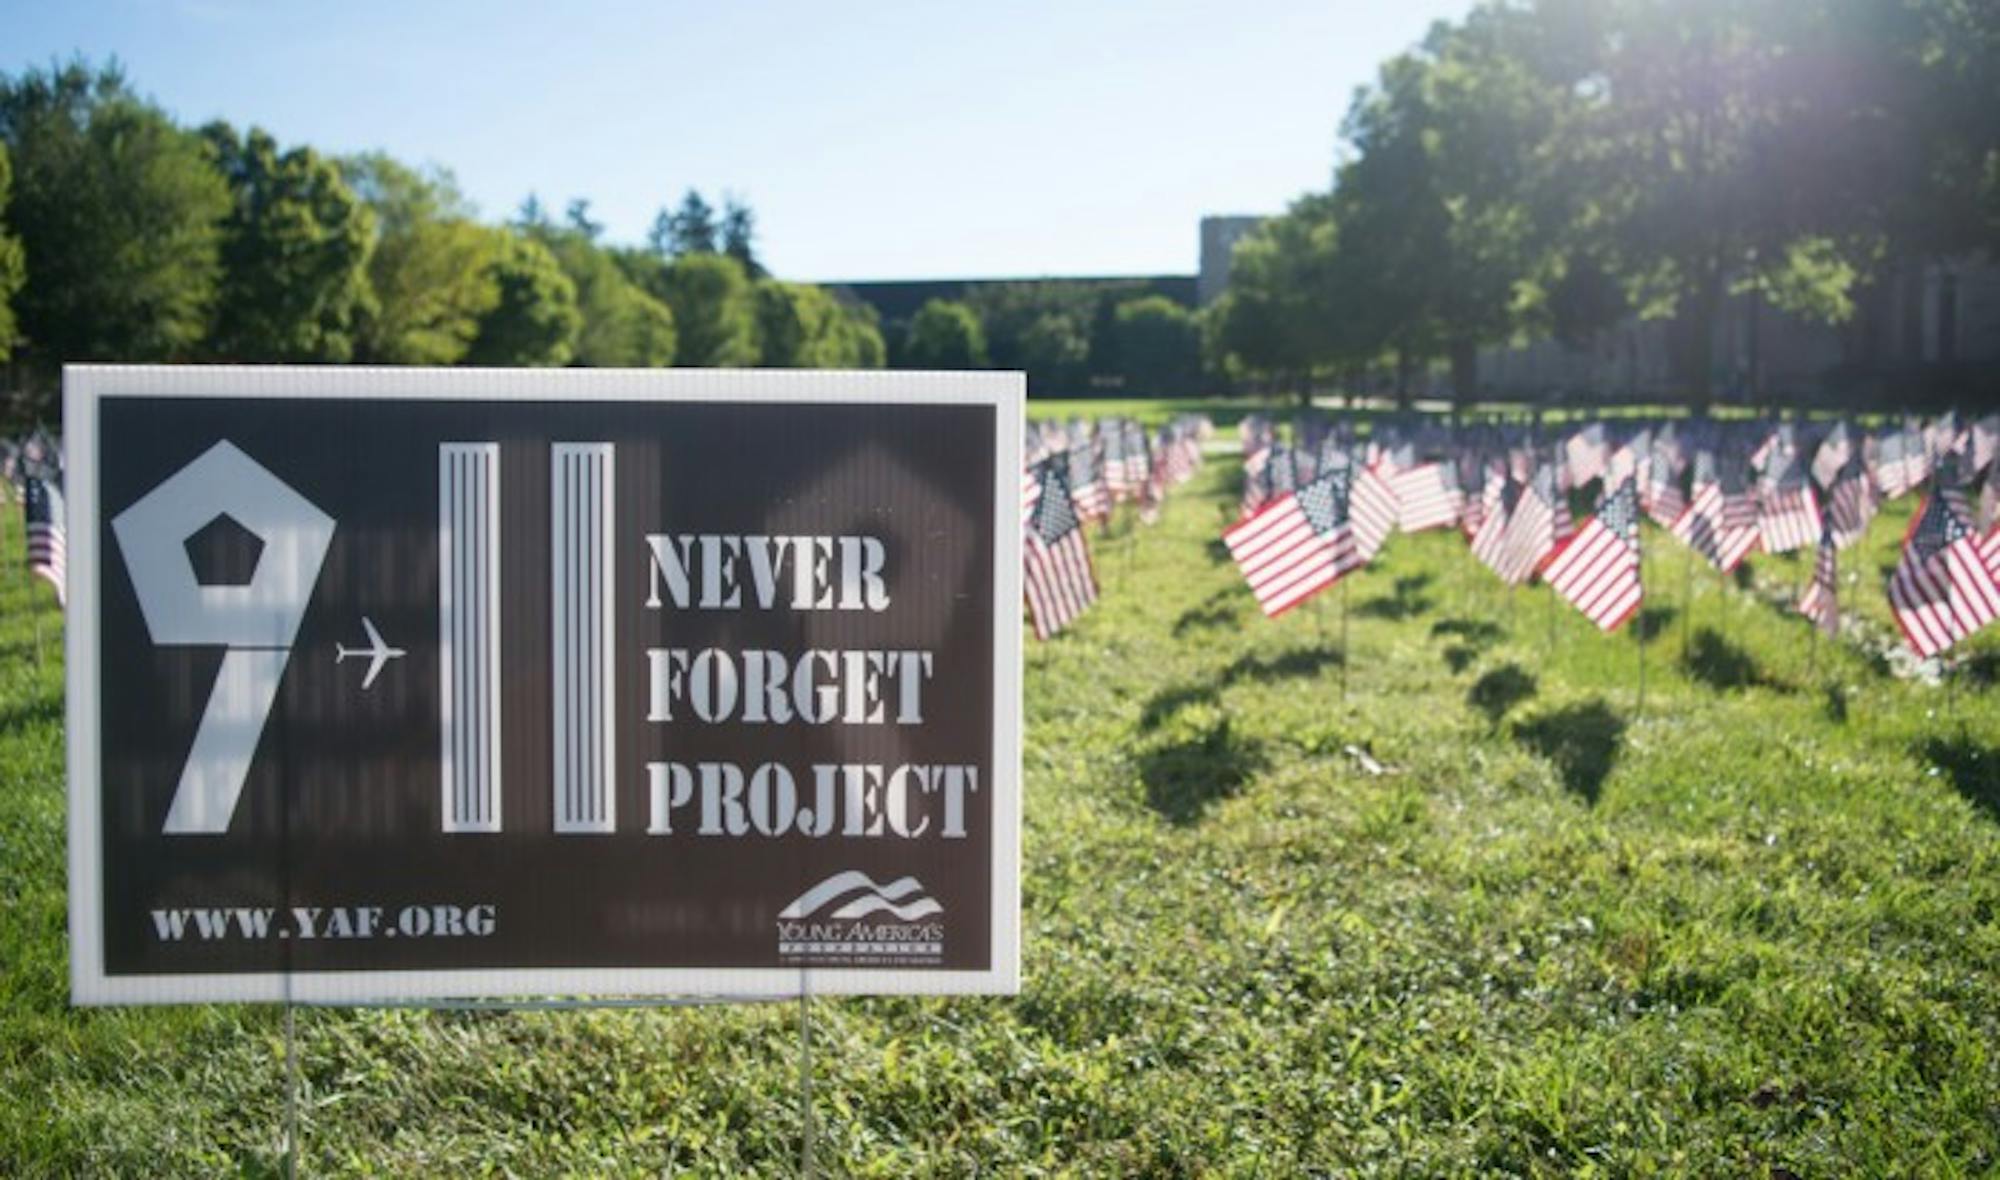 American flags were planted on South quad on Sunday, representing the 2,977 lives lost 15 years ago in the attacks on the World Trade Center in New York City, the Pentagon in Washington, D.C., and Flight 93.